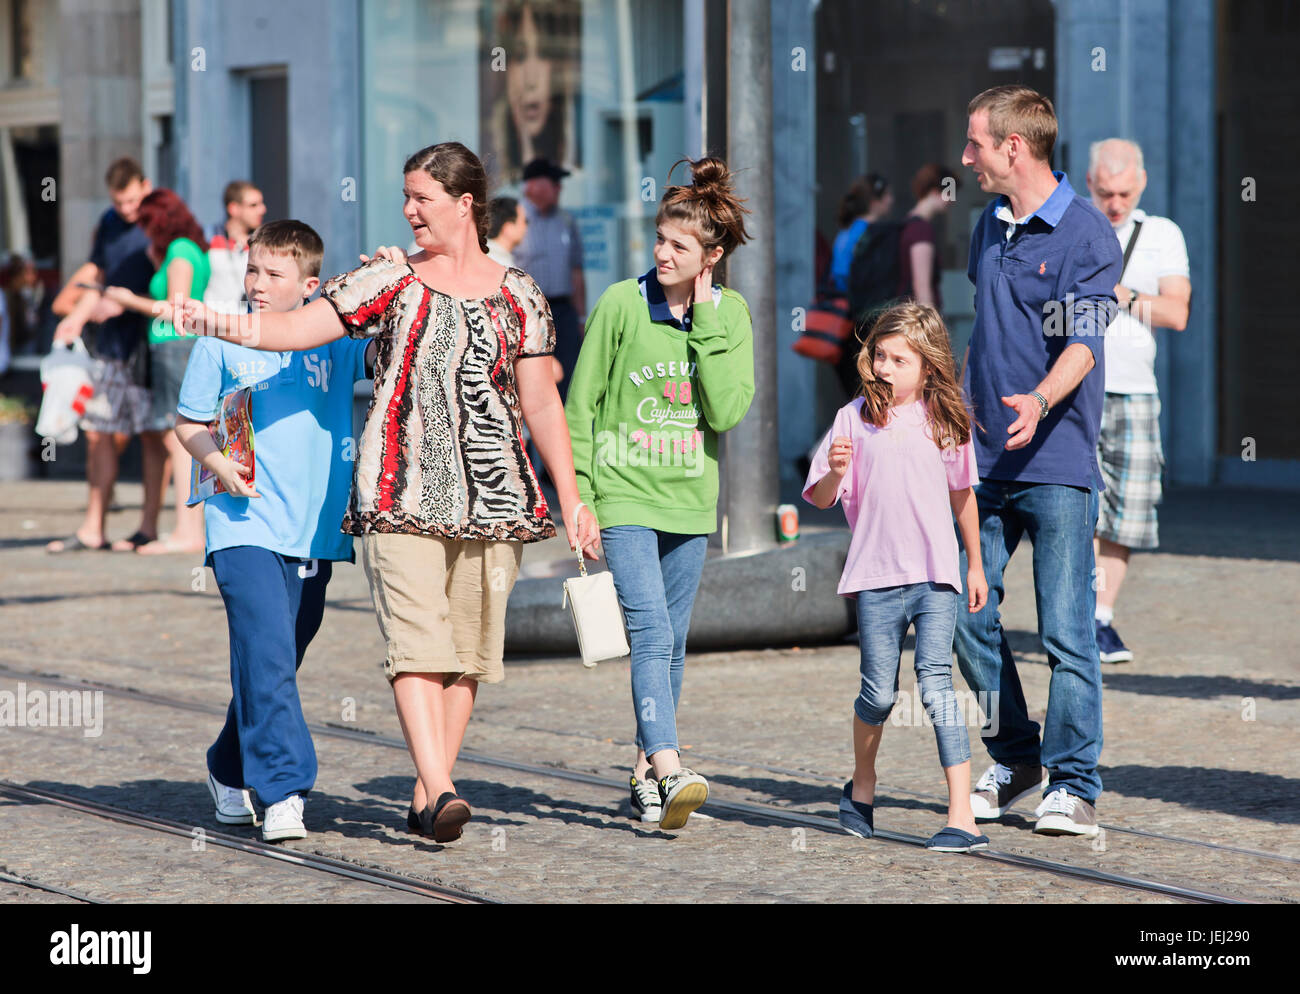 AMSTERDAM-AUG. 20, 2012. Family have fun walking around in Amsterdam. With 12,7 million tourists, The Netherlands had a record number of visitors. Stock Photo